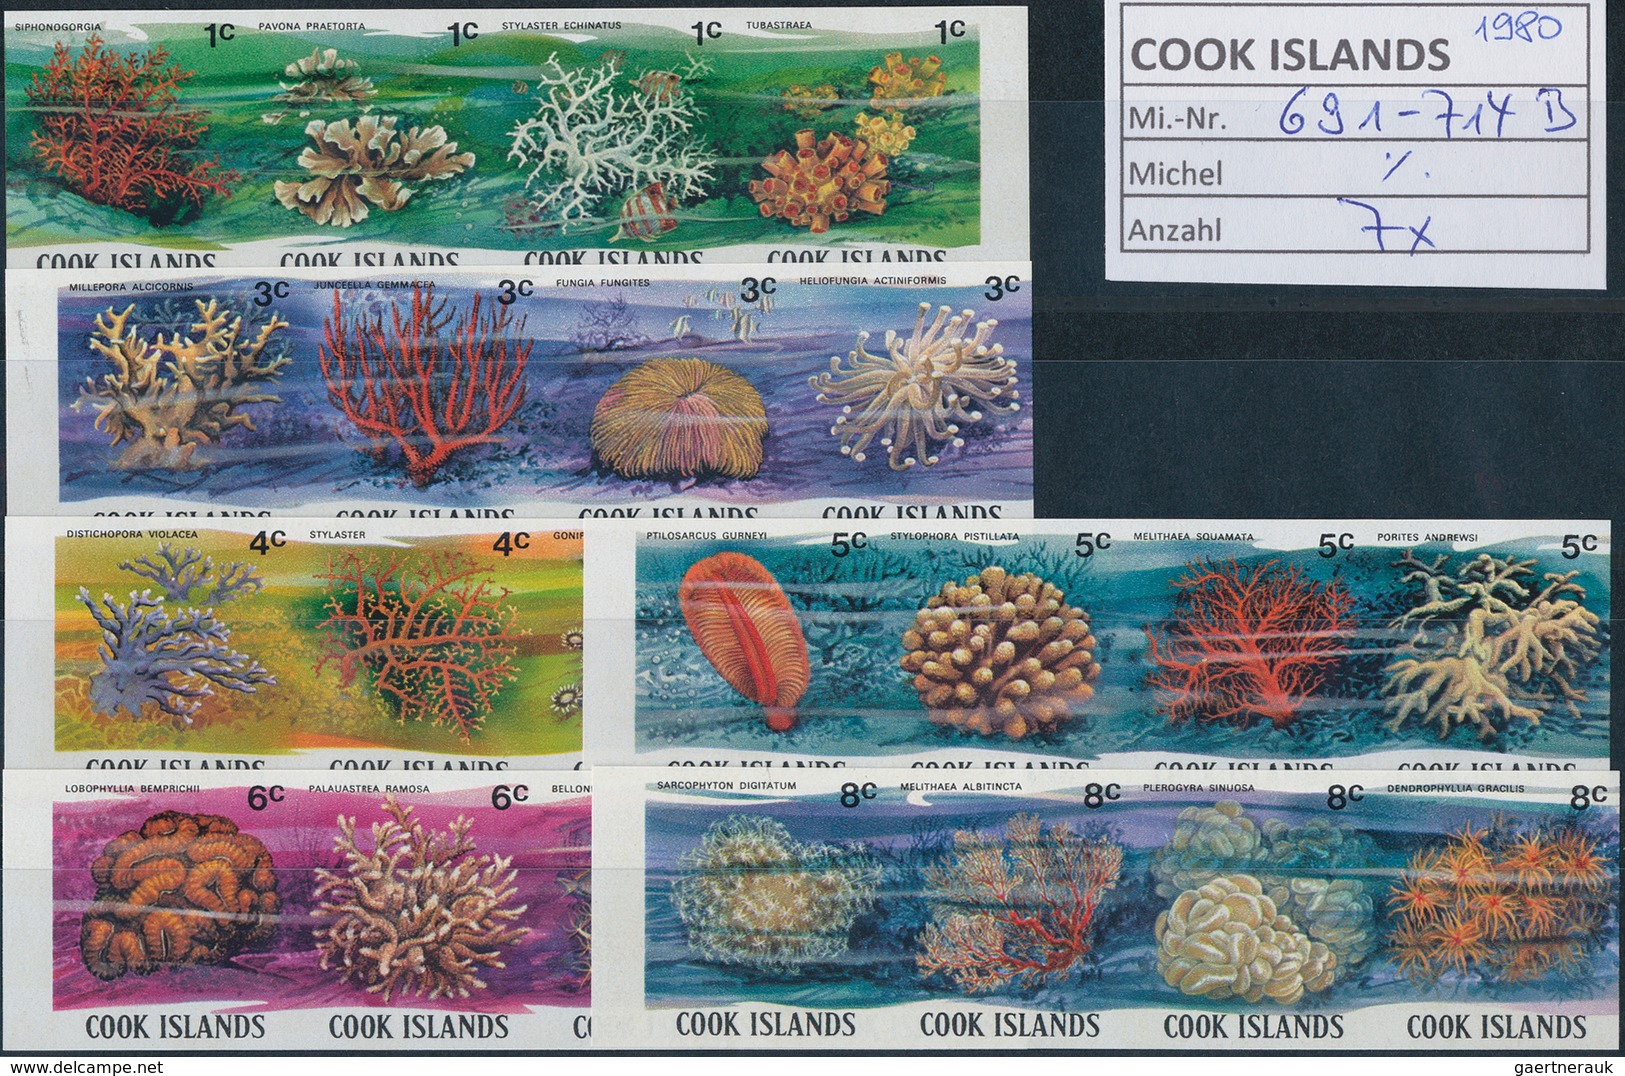 Cook-Inseln: 1967/1989. Lot Of 6,029 IMPERFORATE (instead Of Perforated) Stamps Inclusive Souvenir A - Cook